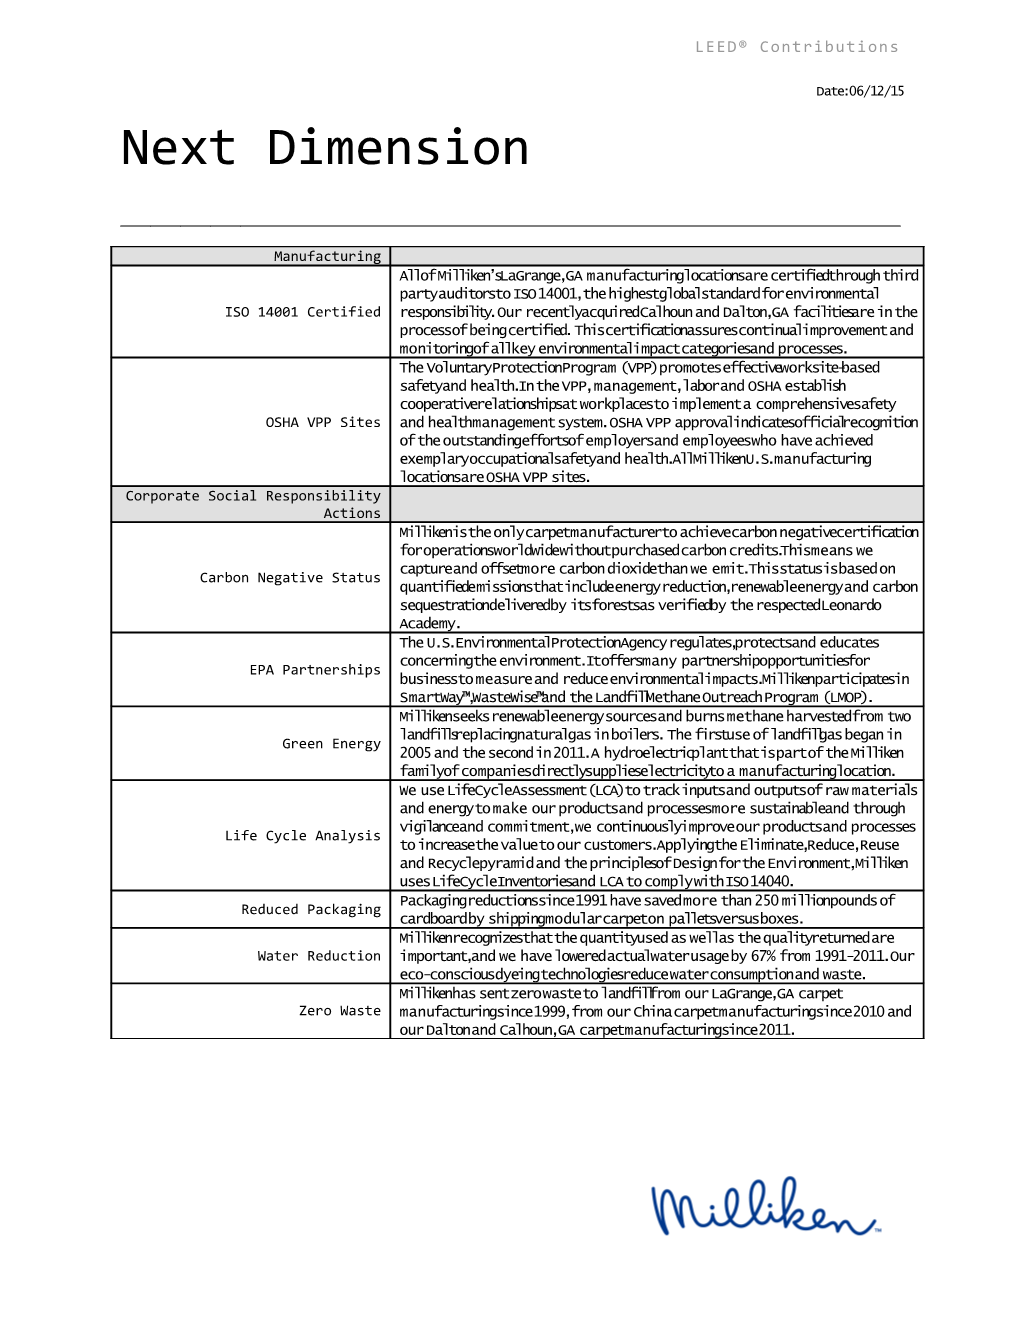 LEED Contributions - Next Dimension